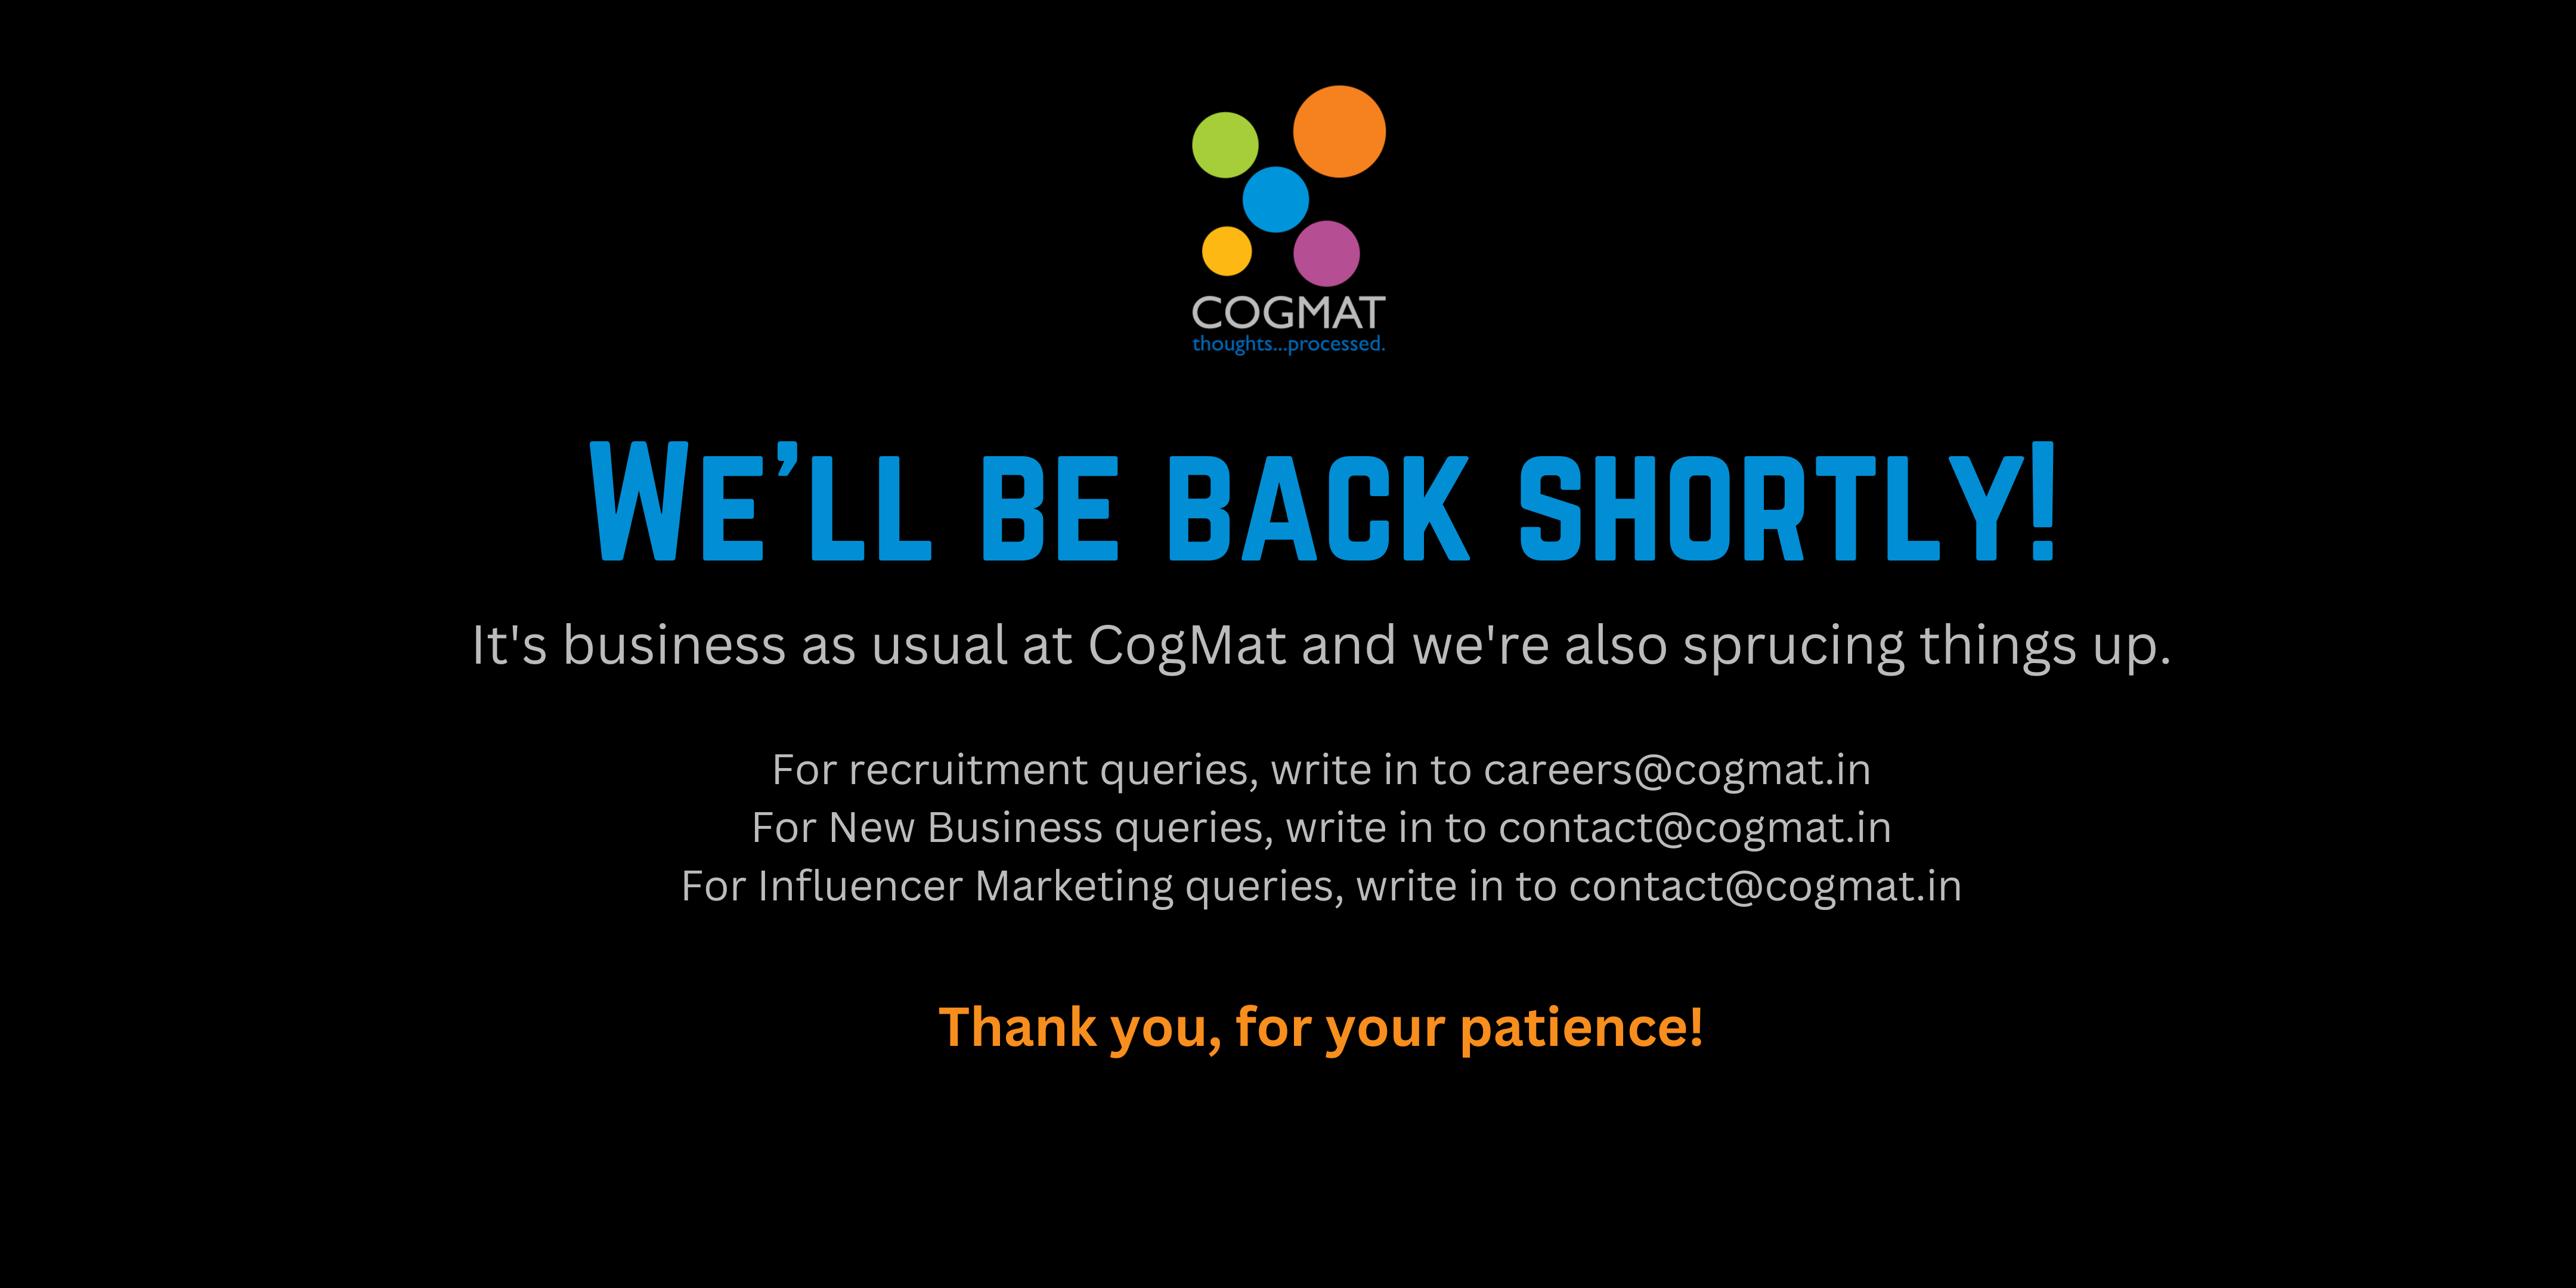 CogMat website will be back soon